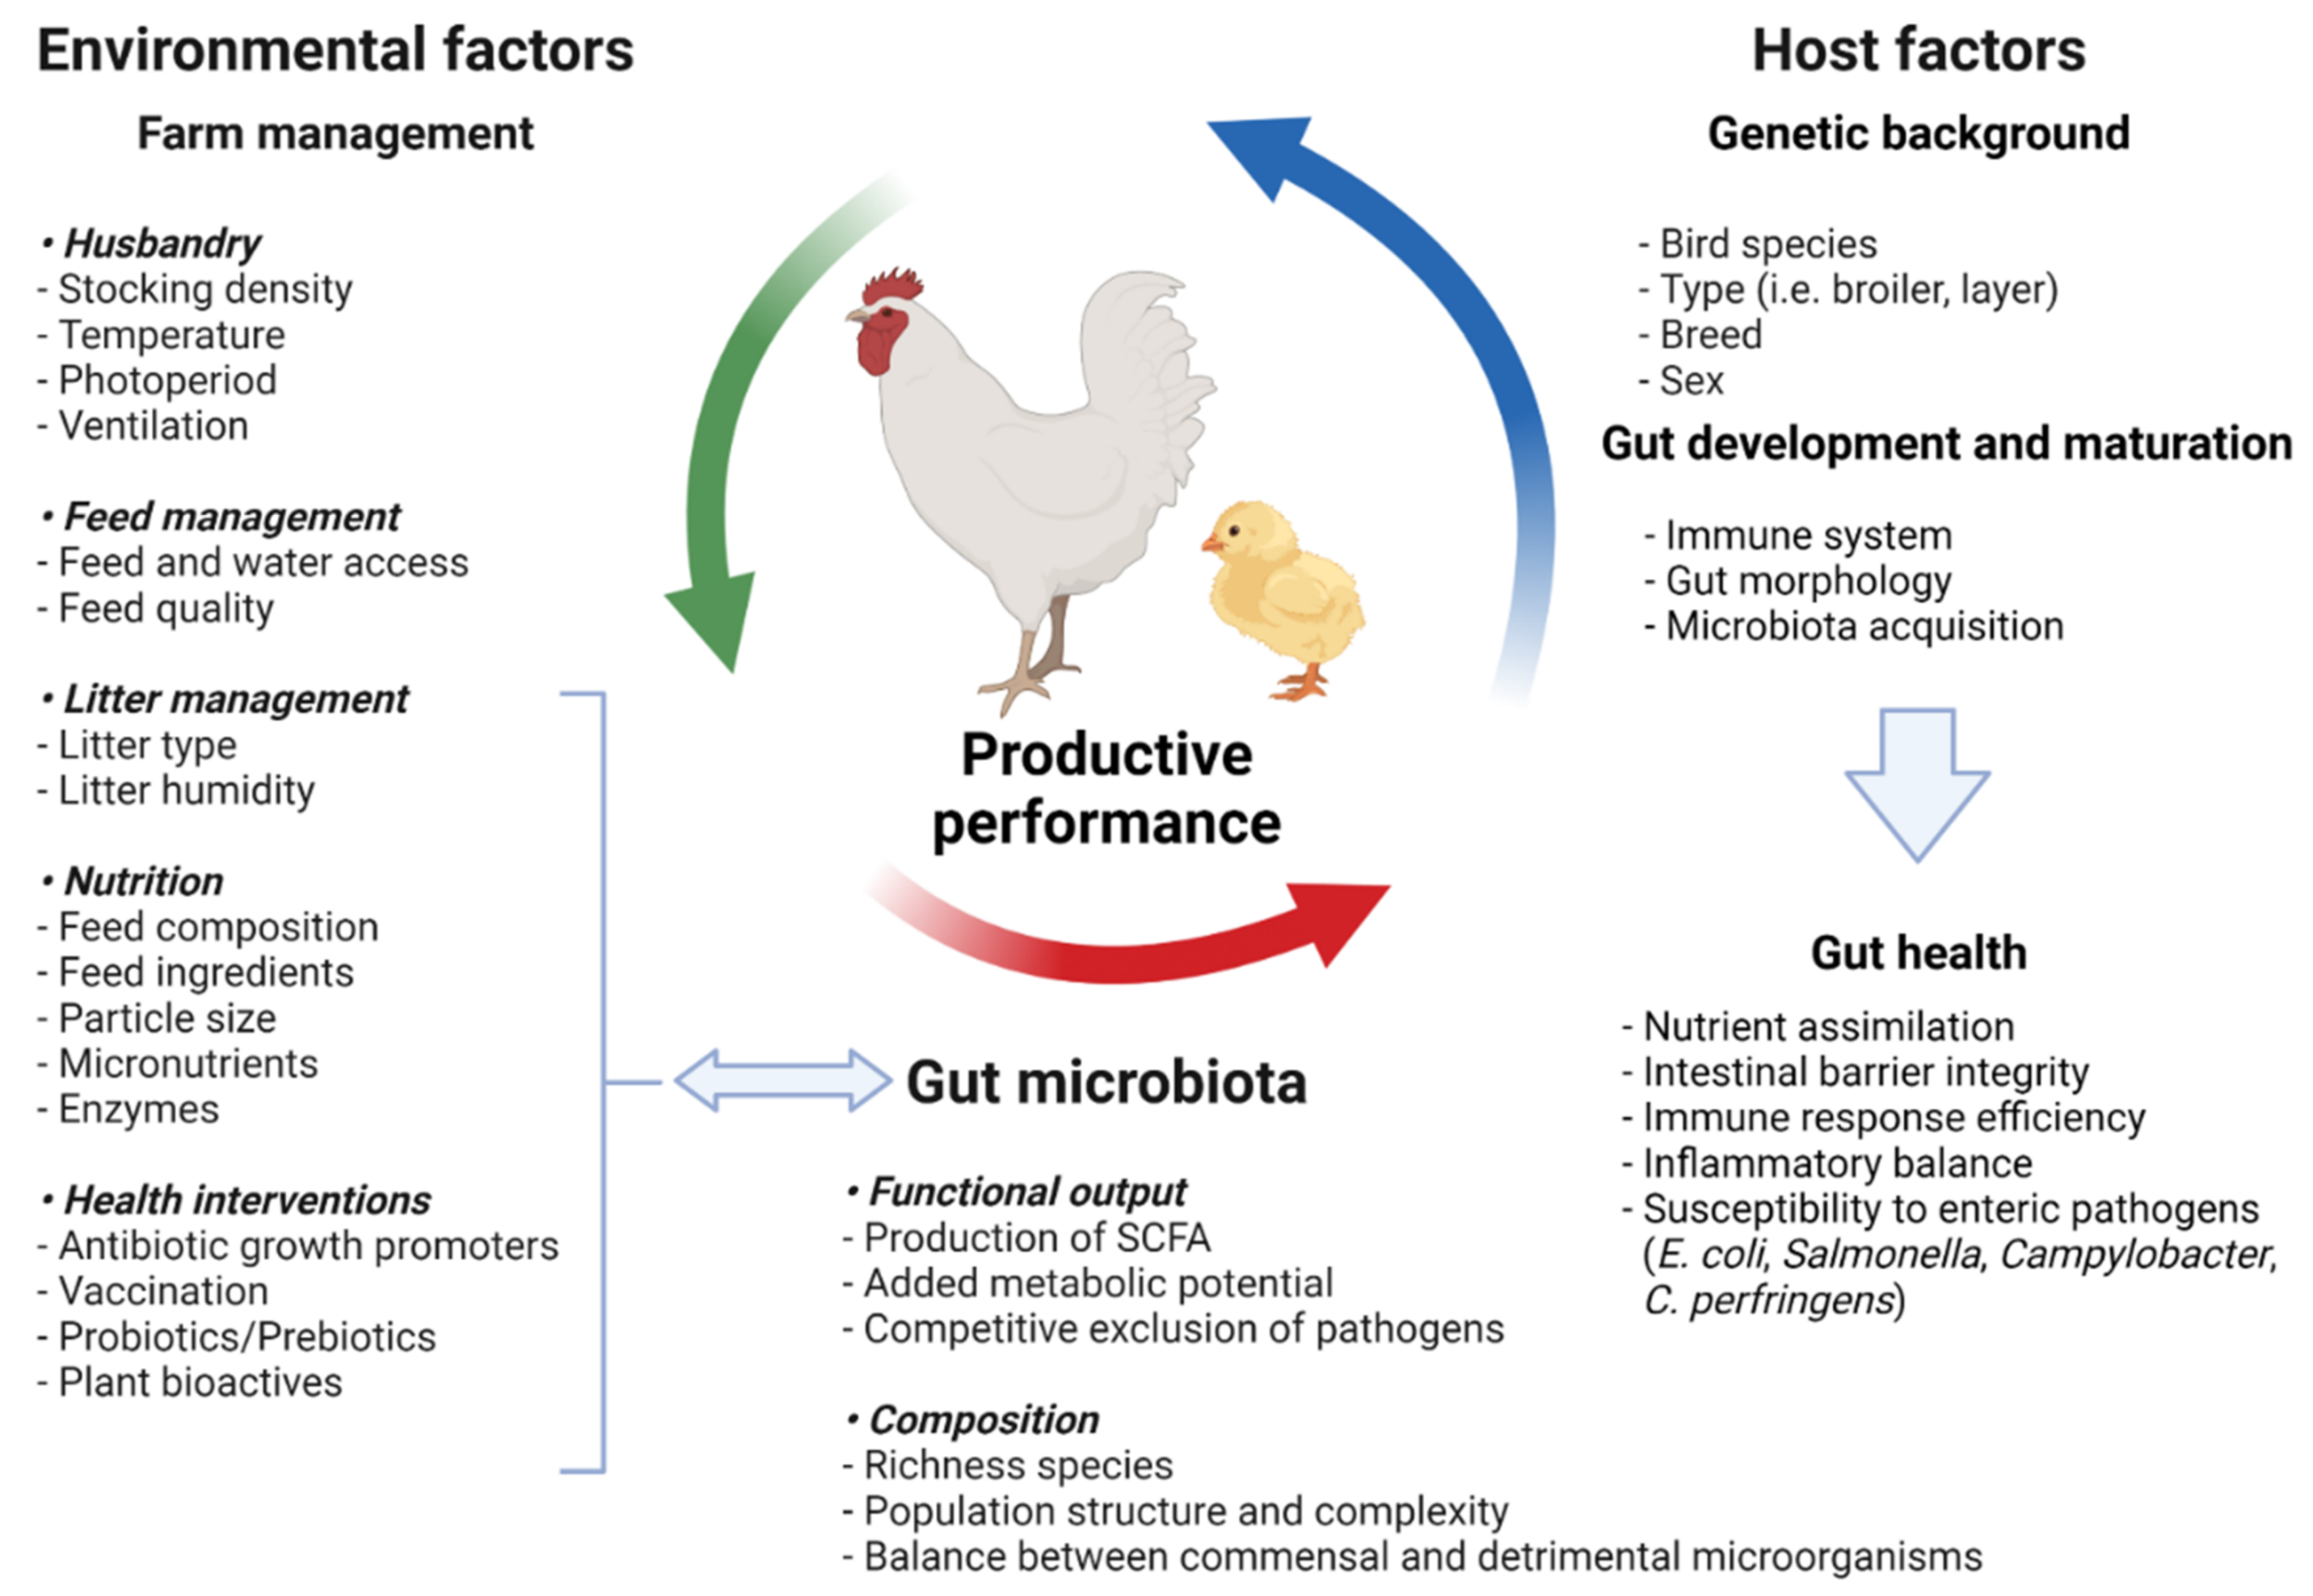 IV. Factors Affecting Calcium Absorption in Poultry